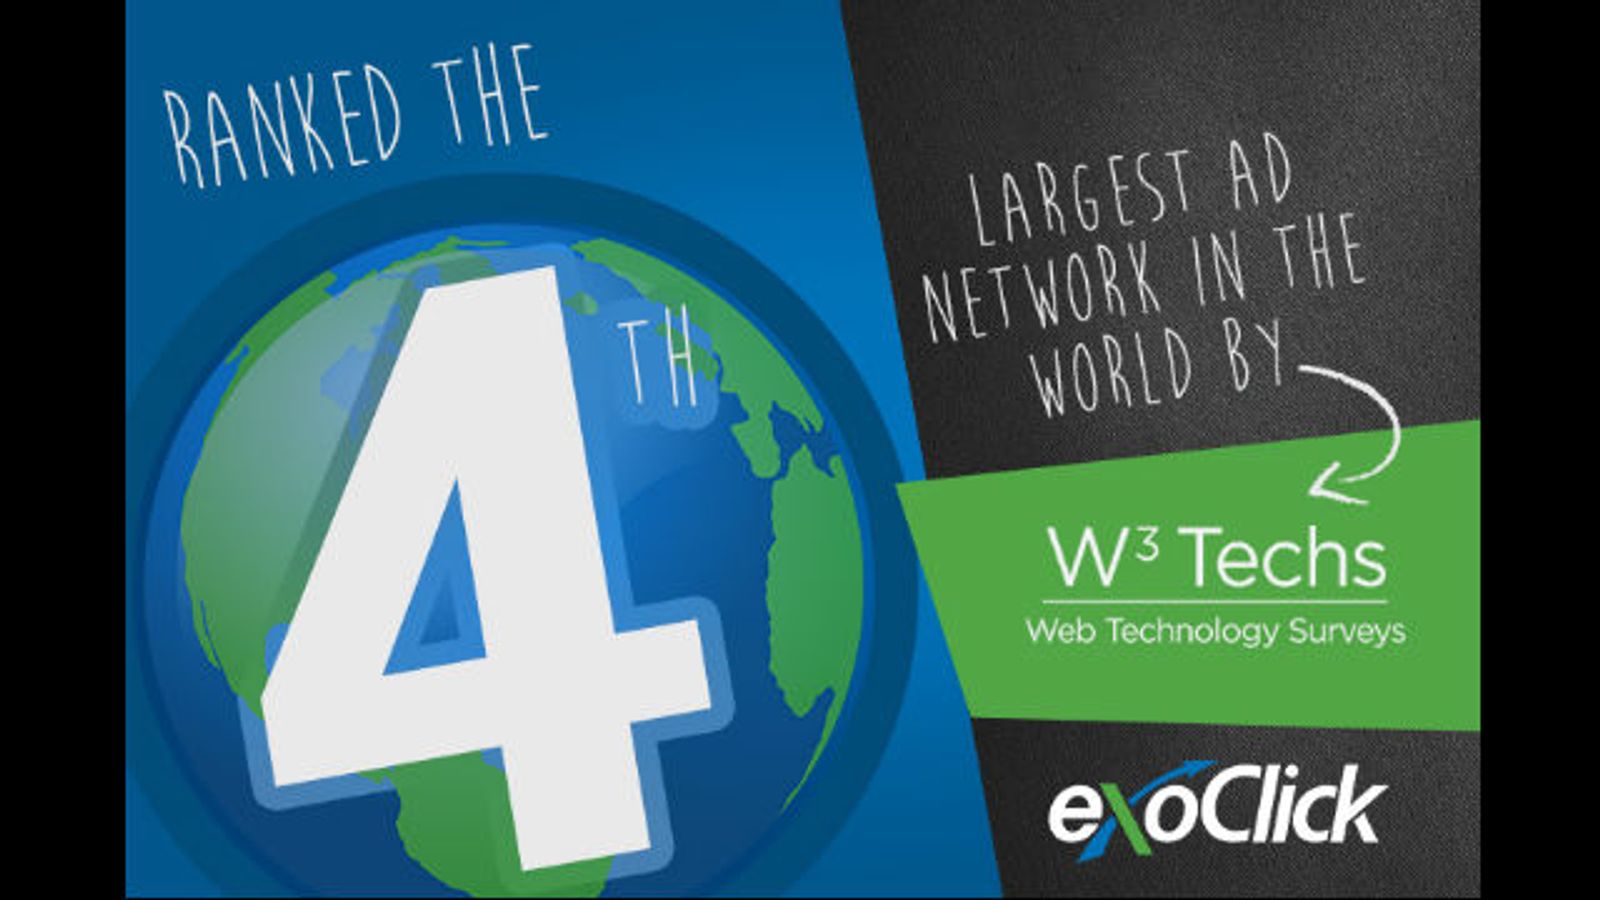 ExoClick Now Ranked World’s 4th Largest Ad Network